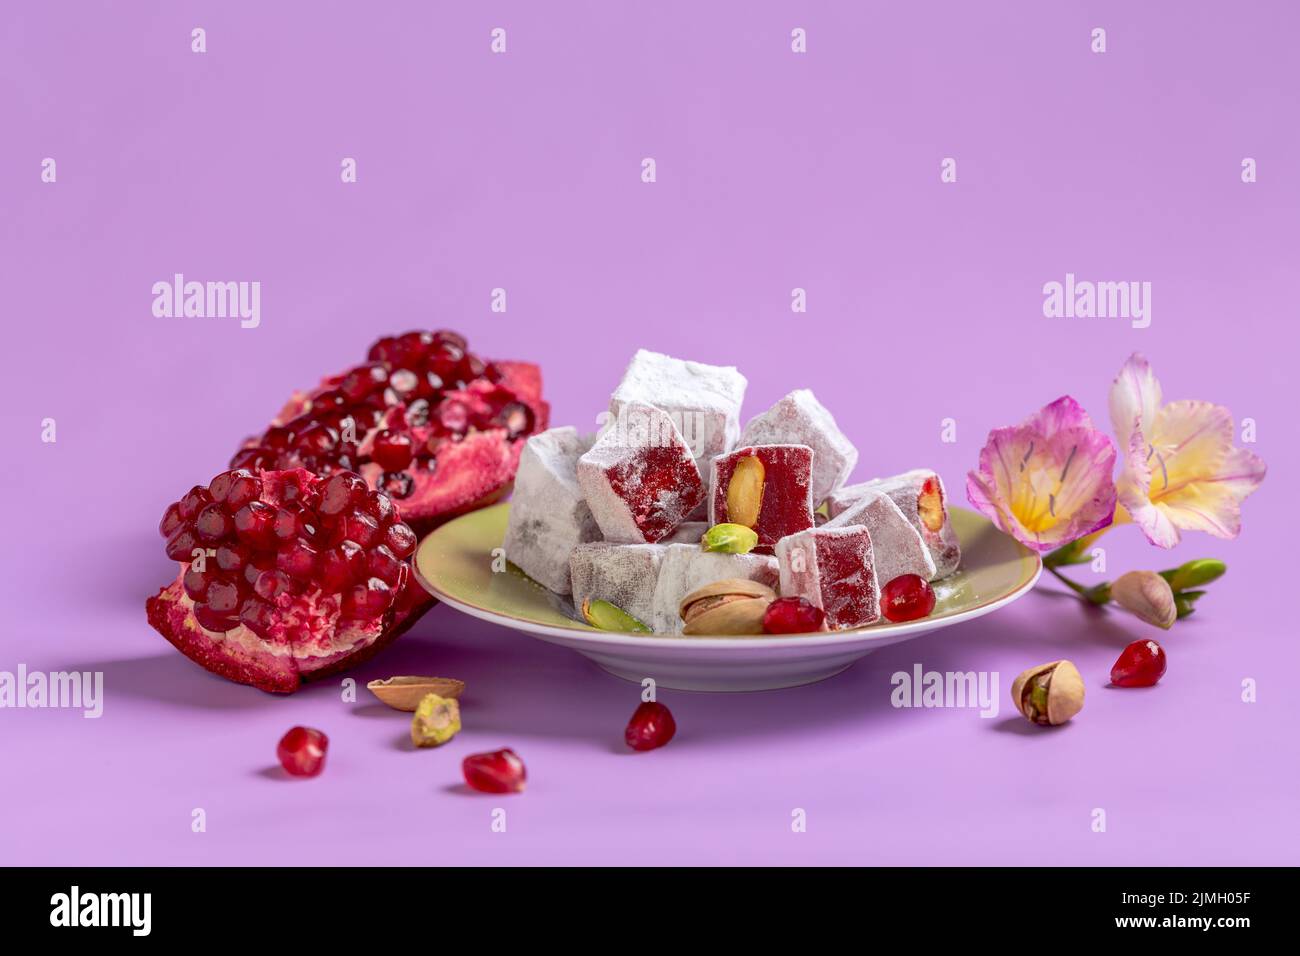 Turkish delight, pistachios and pomegranate. Stock Photo